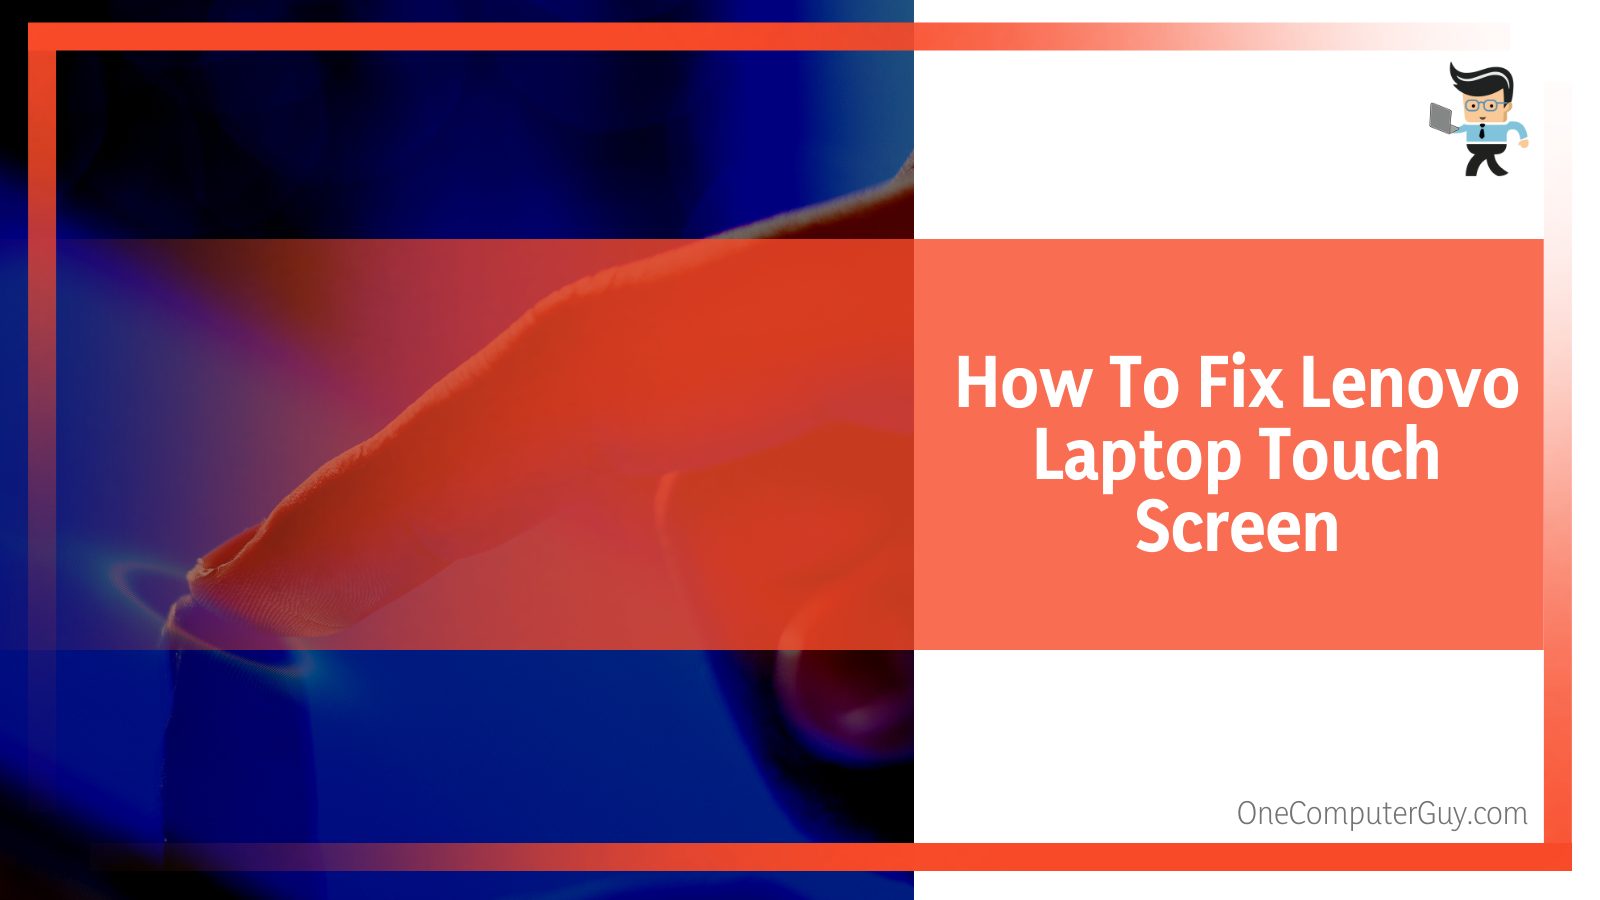 How To Fix Lenovo Laptop Touch Screen